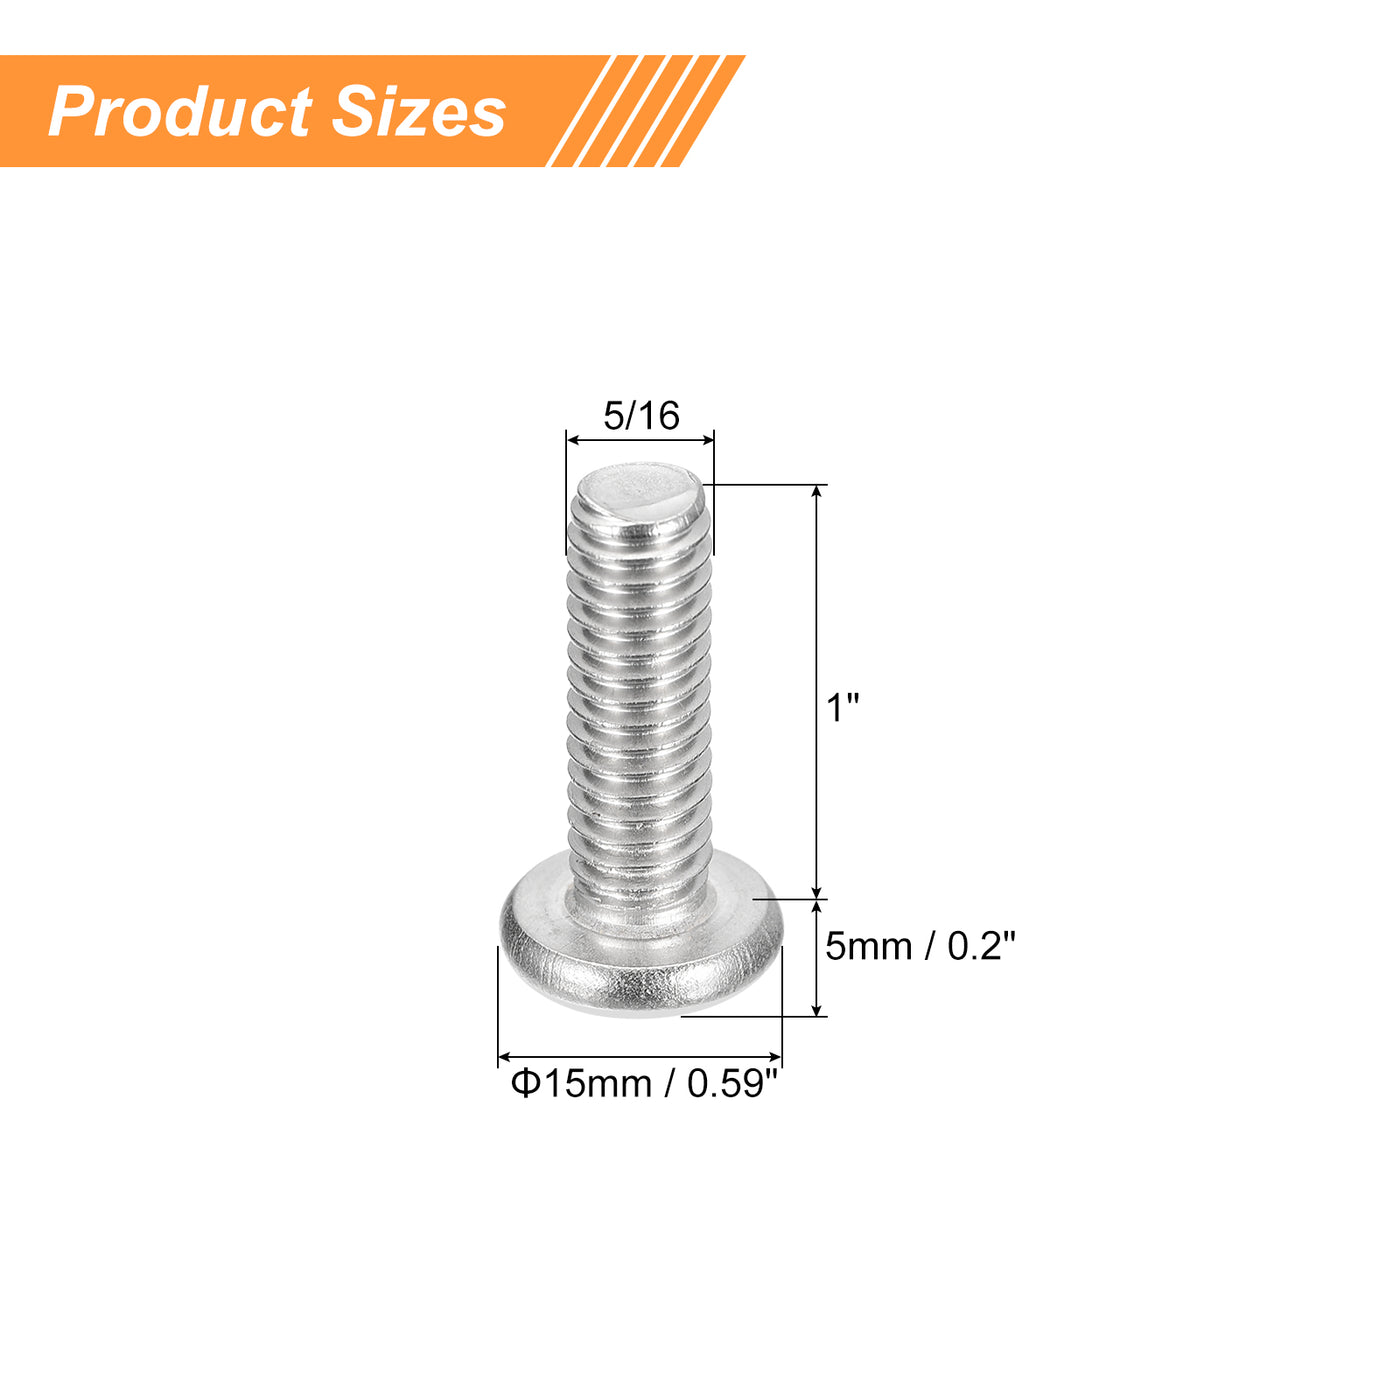 uxcell Uxcell 5/16-18x1" Pan Head Machine Screws, Stainless Steel 18-8 Screw, Pack of 10